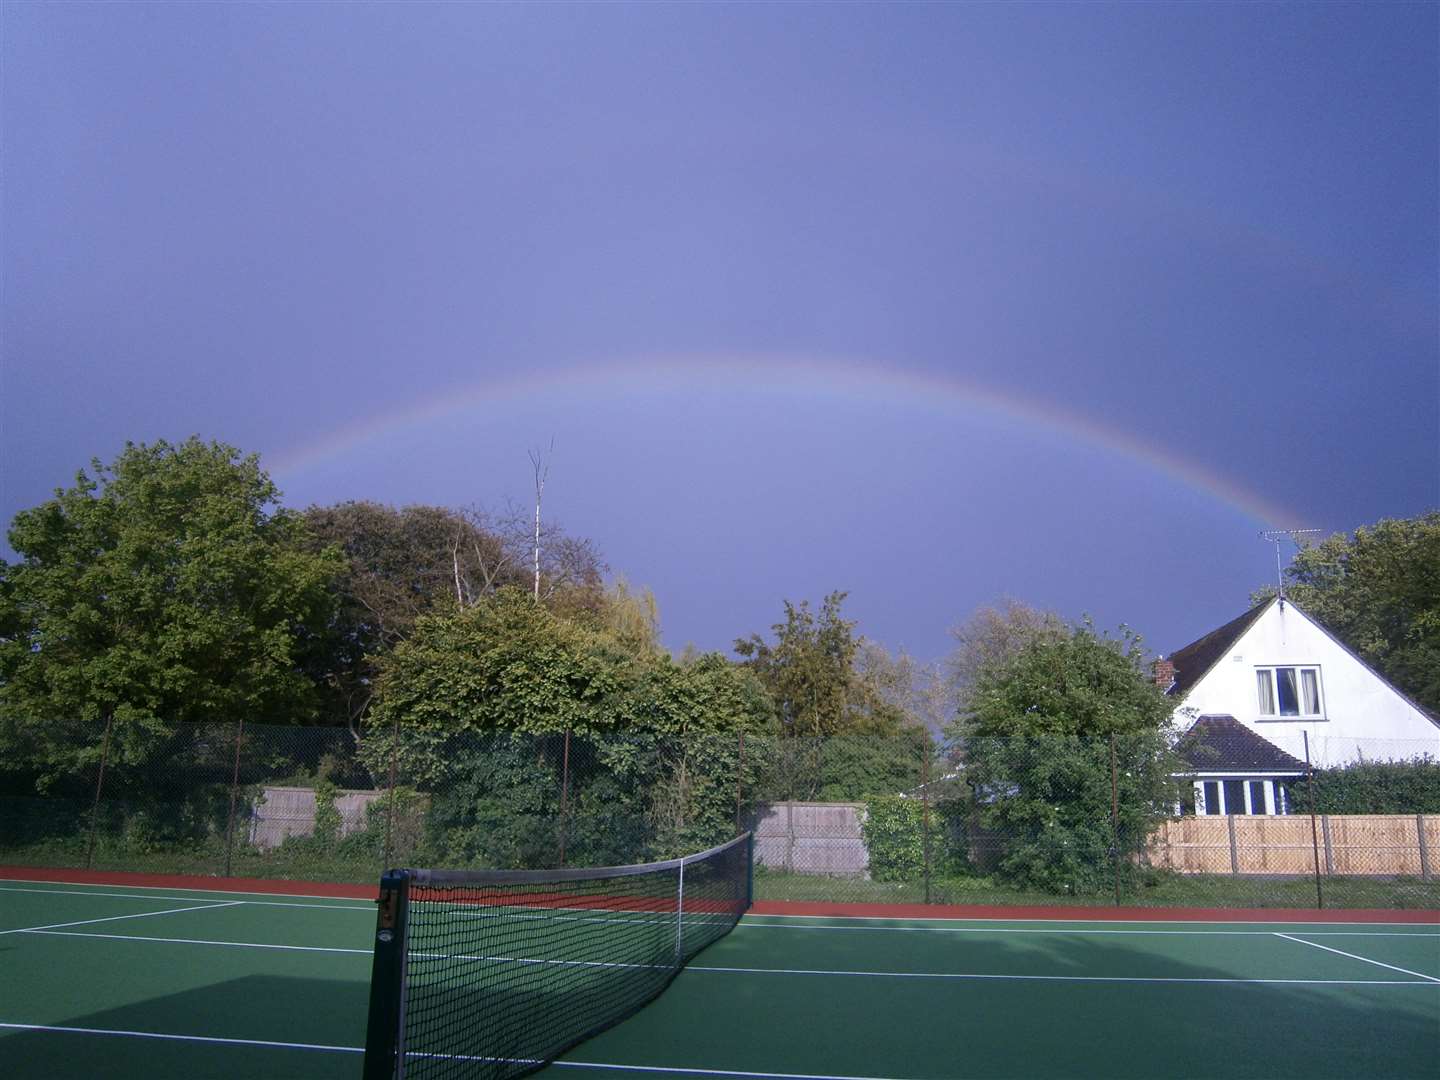 Sandwich Lawn Tennis Club applies for new clubhouse